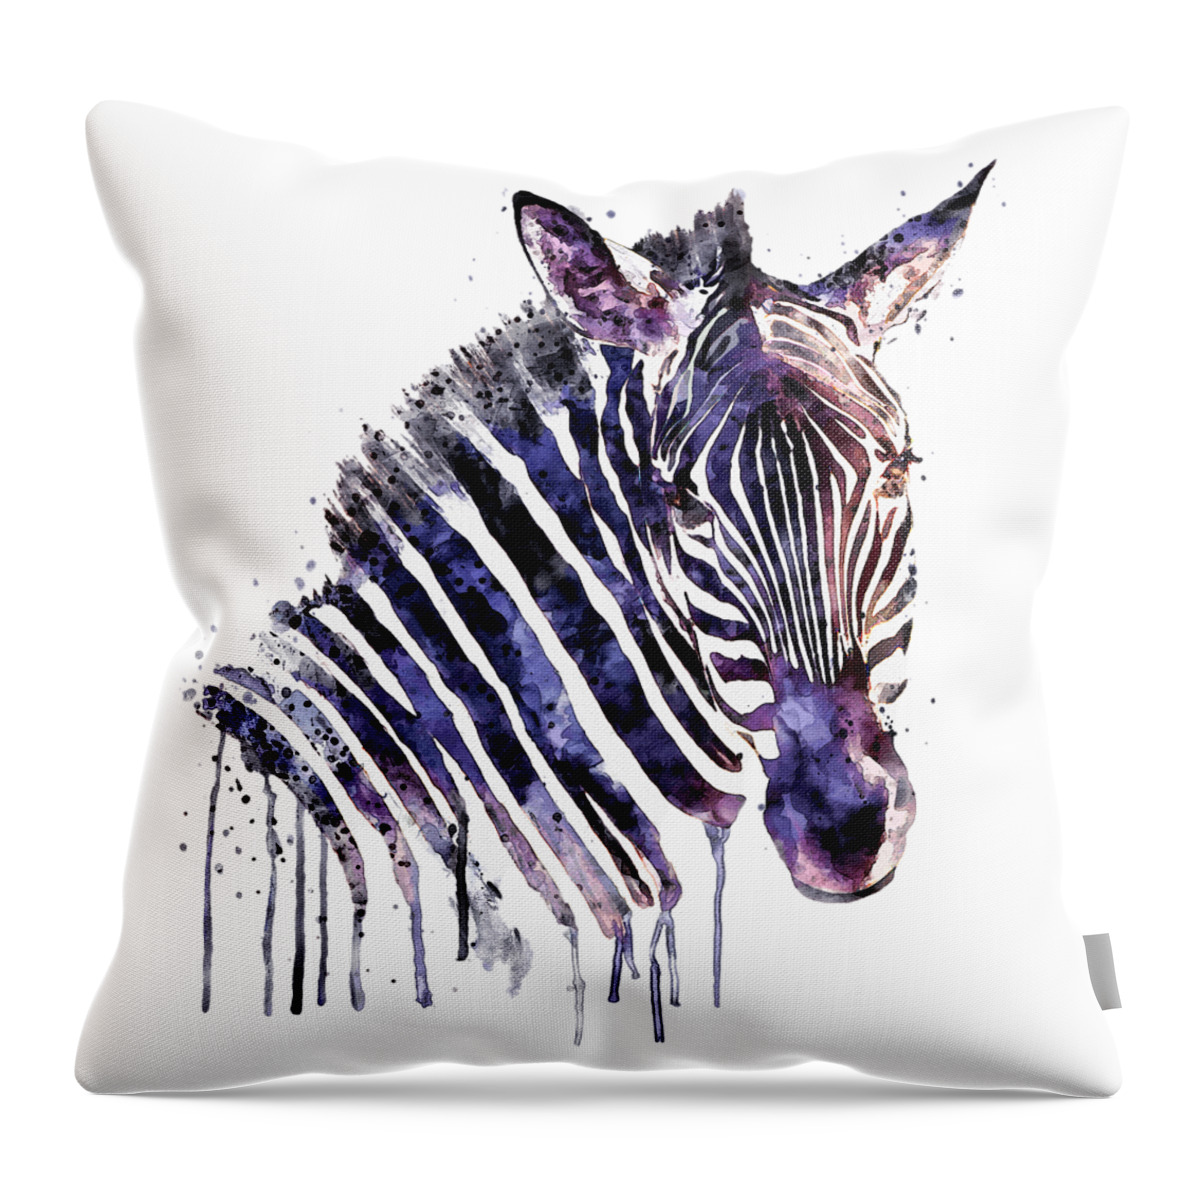 Zebra Head Throw Pillow featuring the painting Zebra Head by Marian Voicu